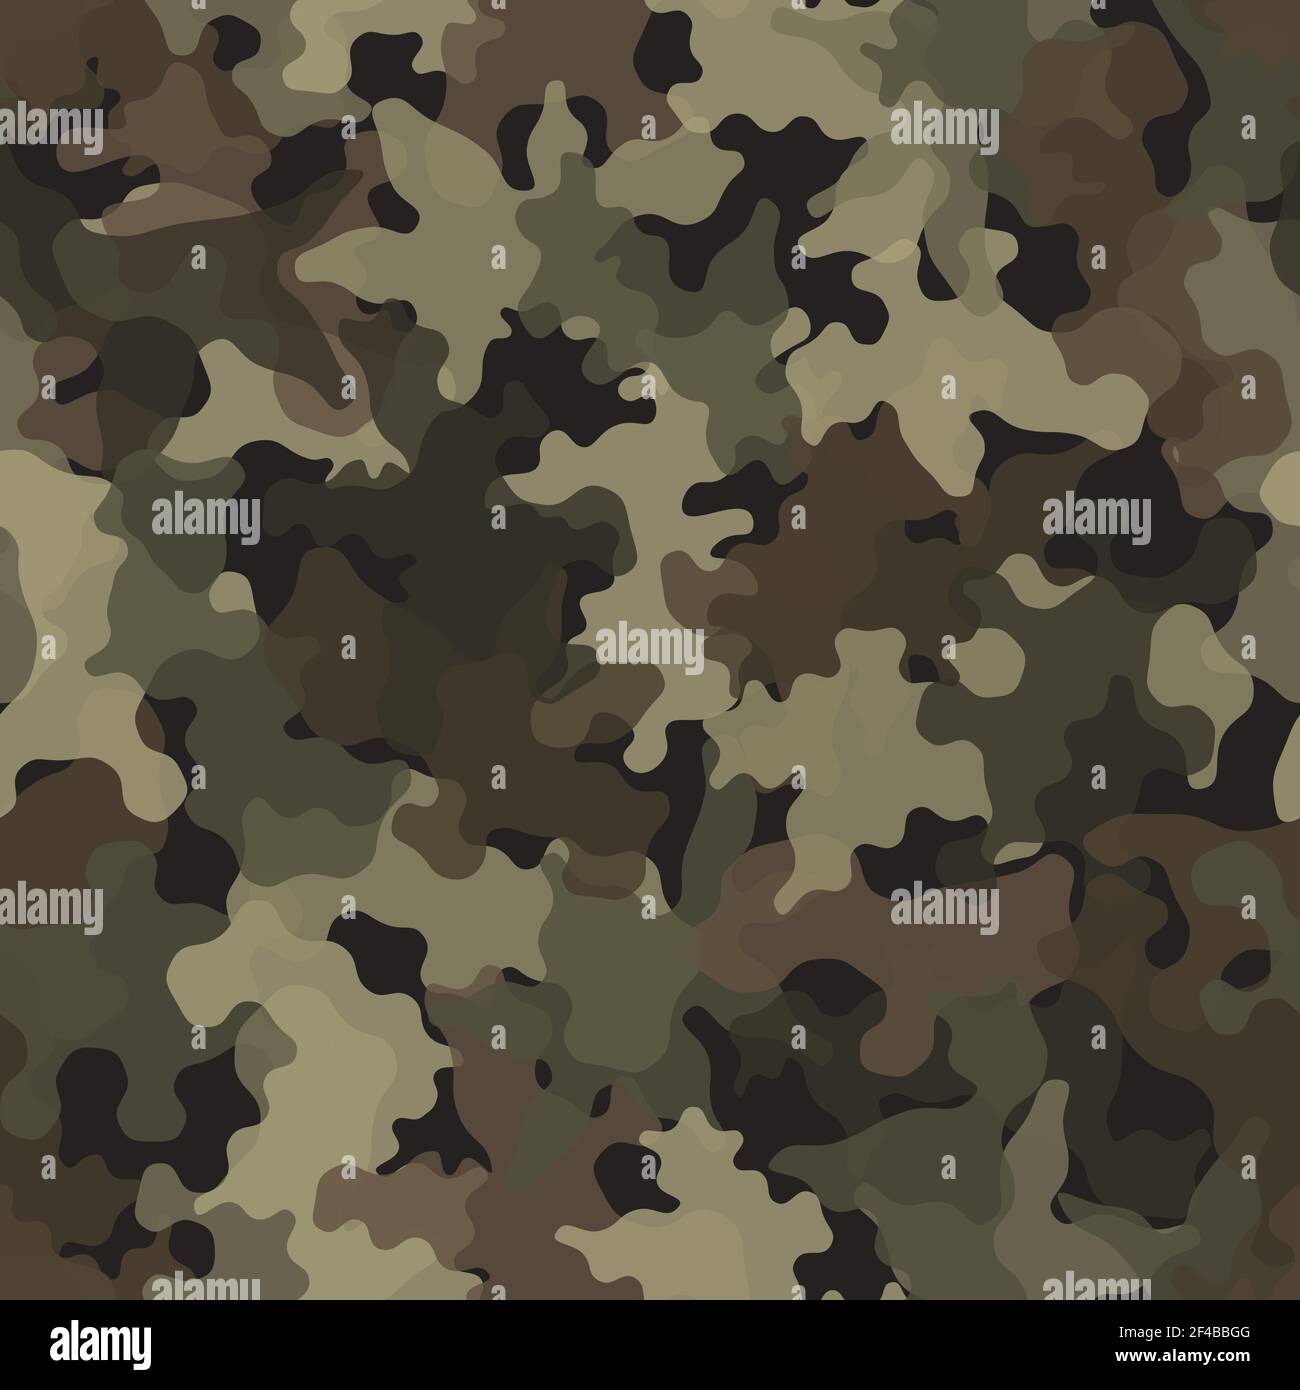 https://c8.alamy.com/comp/2F4BBGG/camouflage-seamless-pattern-texture-abstract-vector-military-camo-backgound-2F4BBGG.jpg